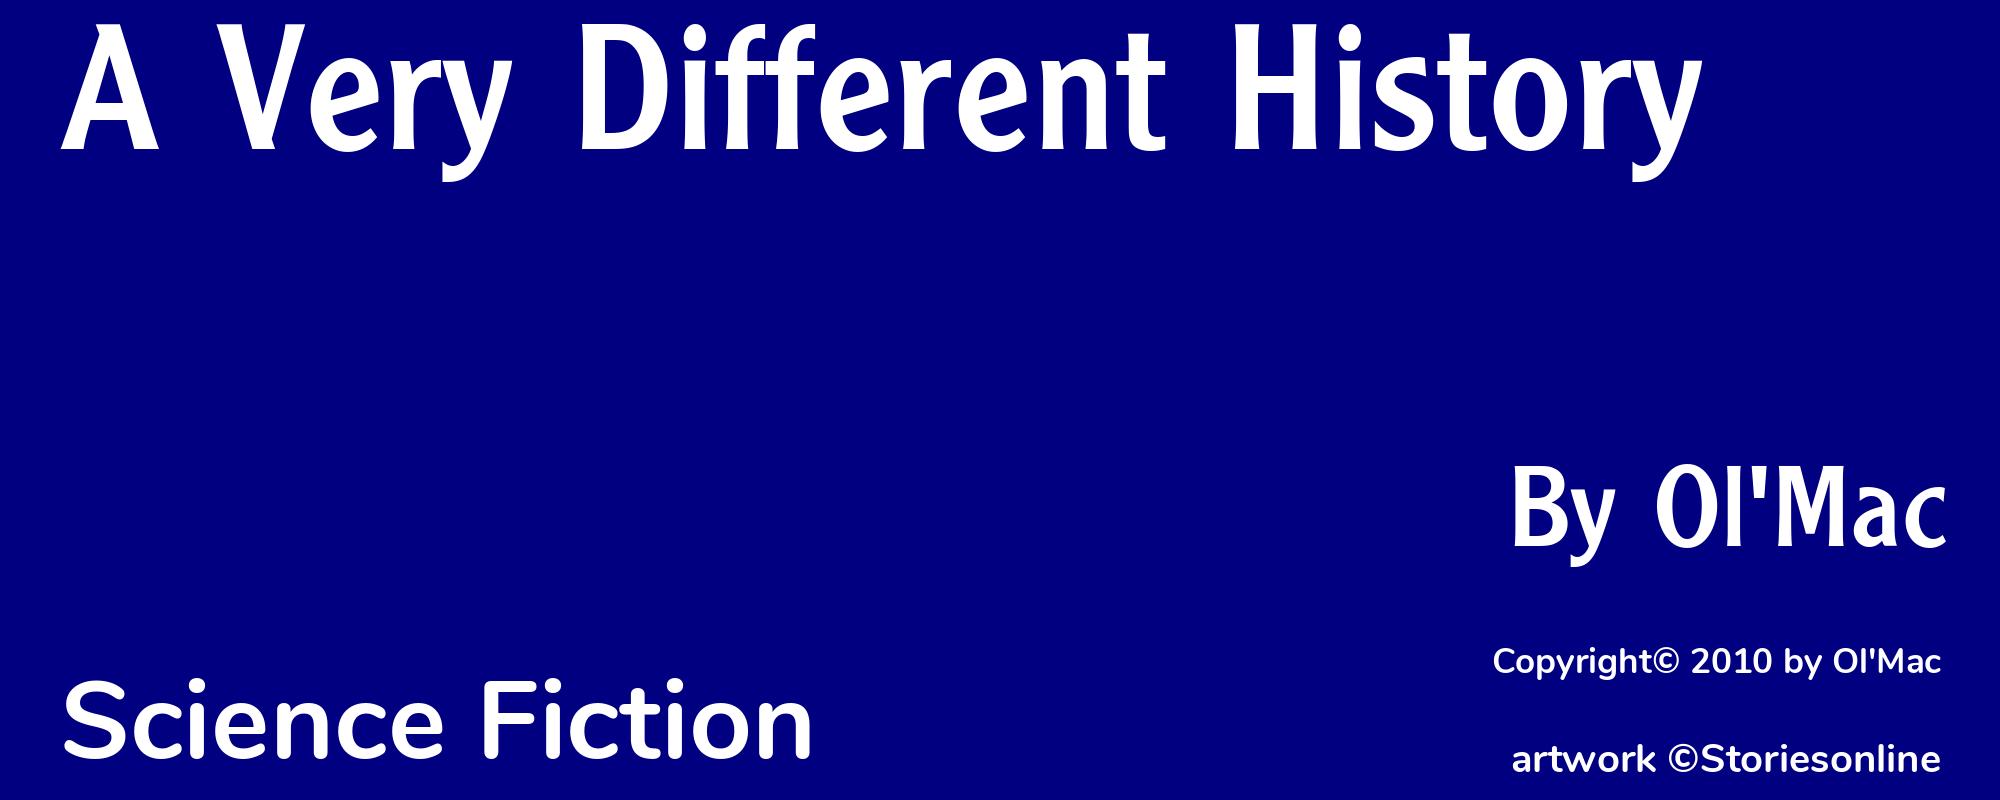 A Very Different History - Cover